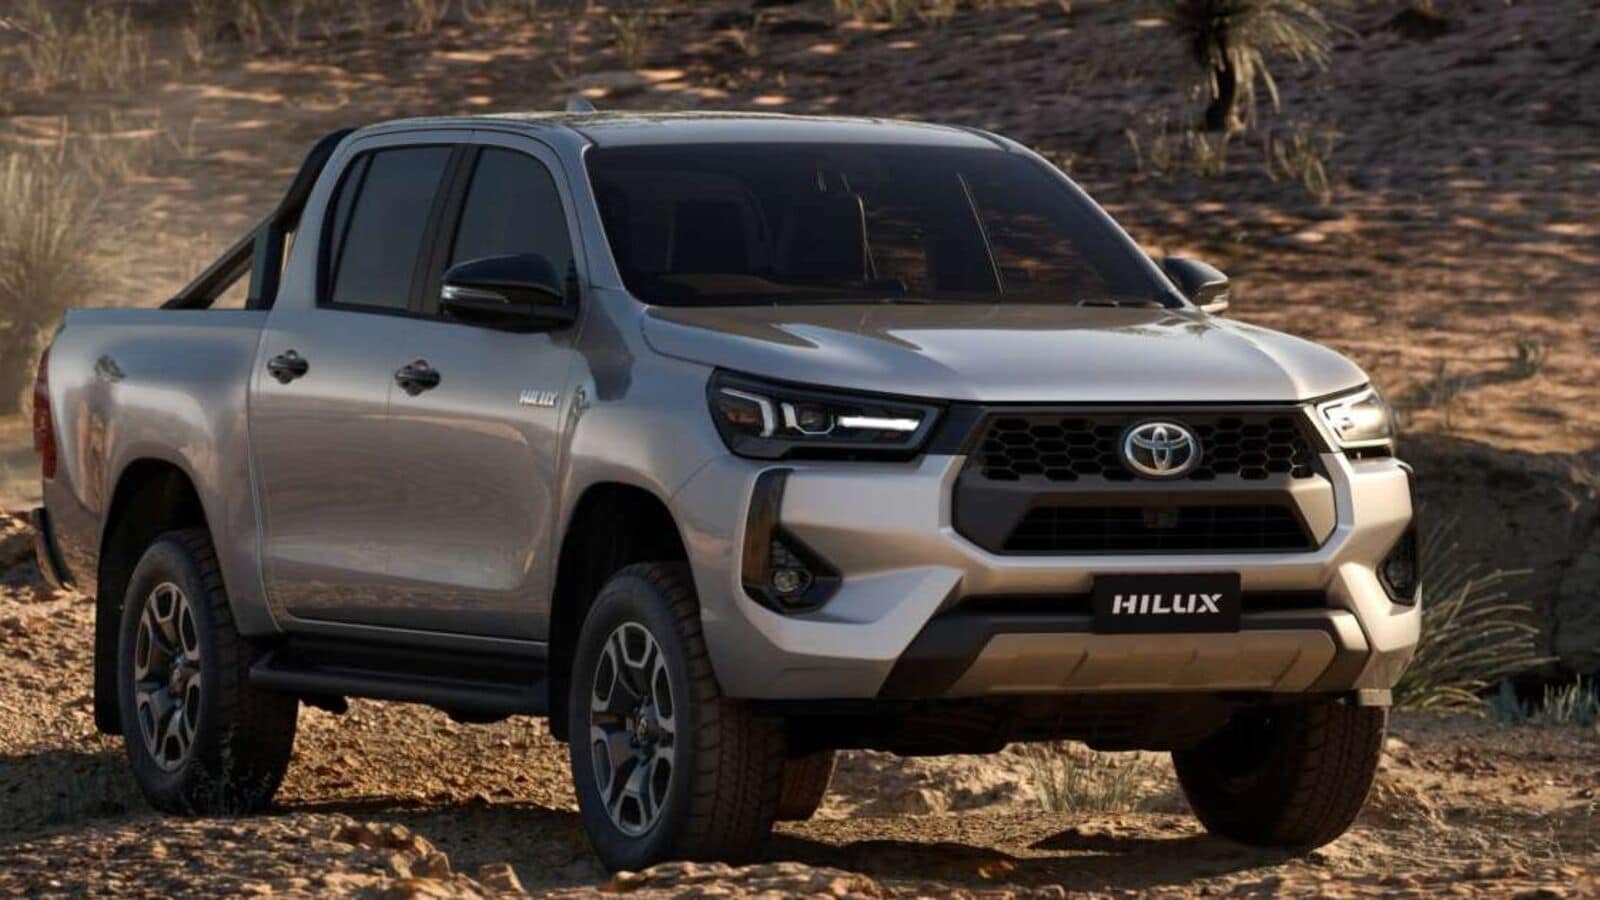 Toyota HiLux facelift makes debut with a new face and hybrid powertrain